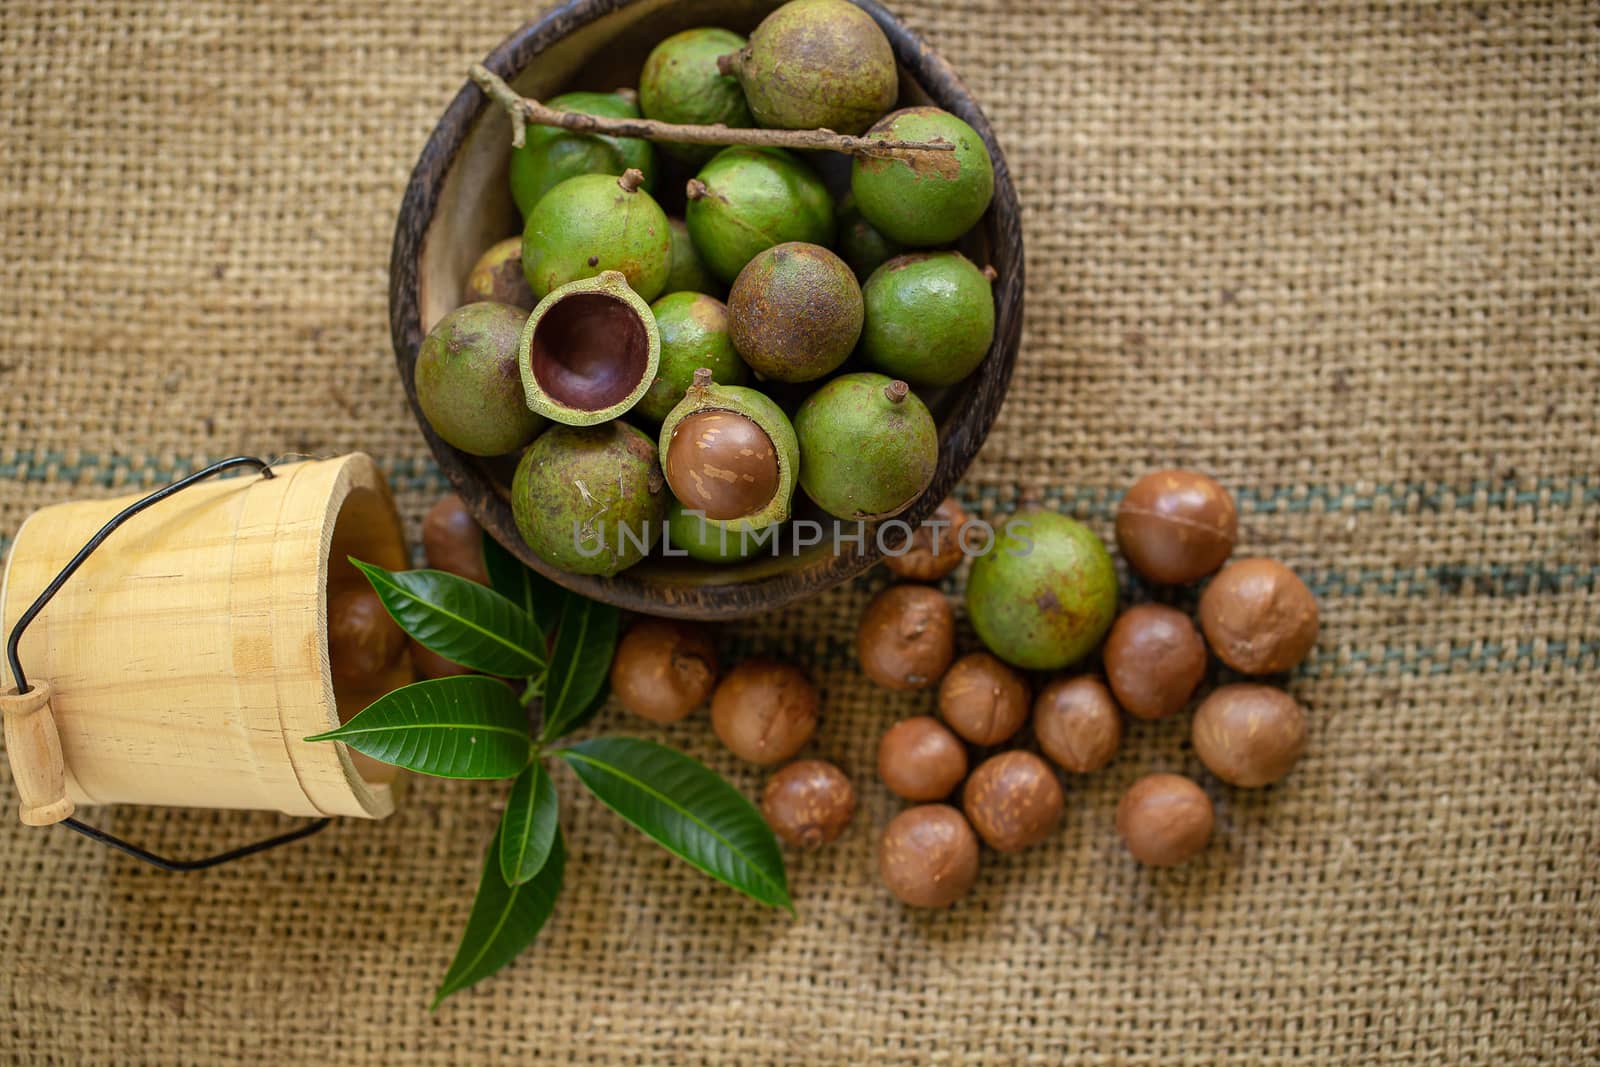 Macadamia nuts on sacks in natural light by kaiskynet